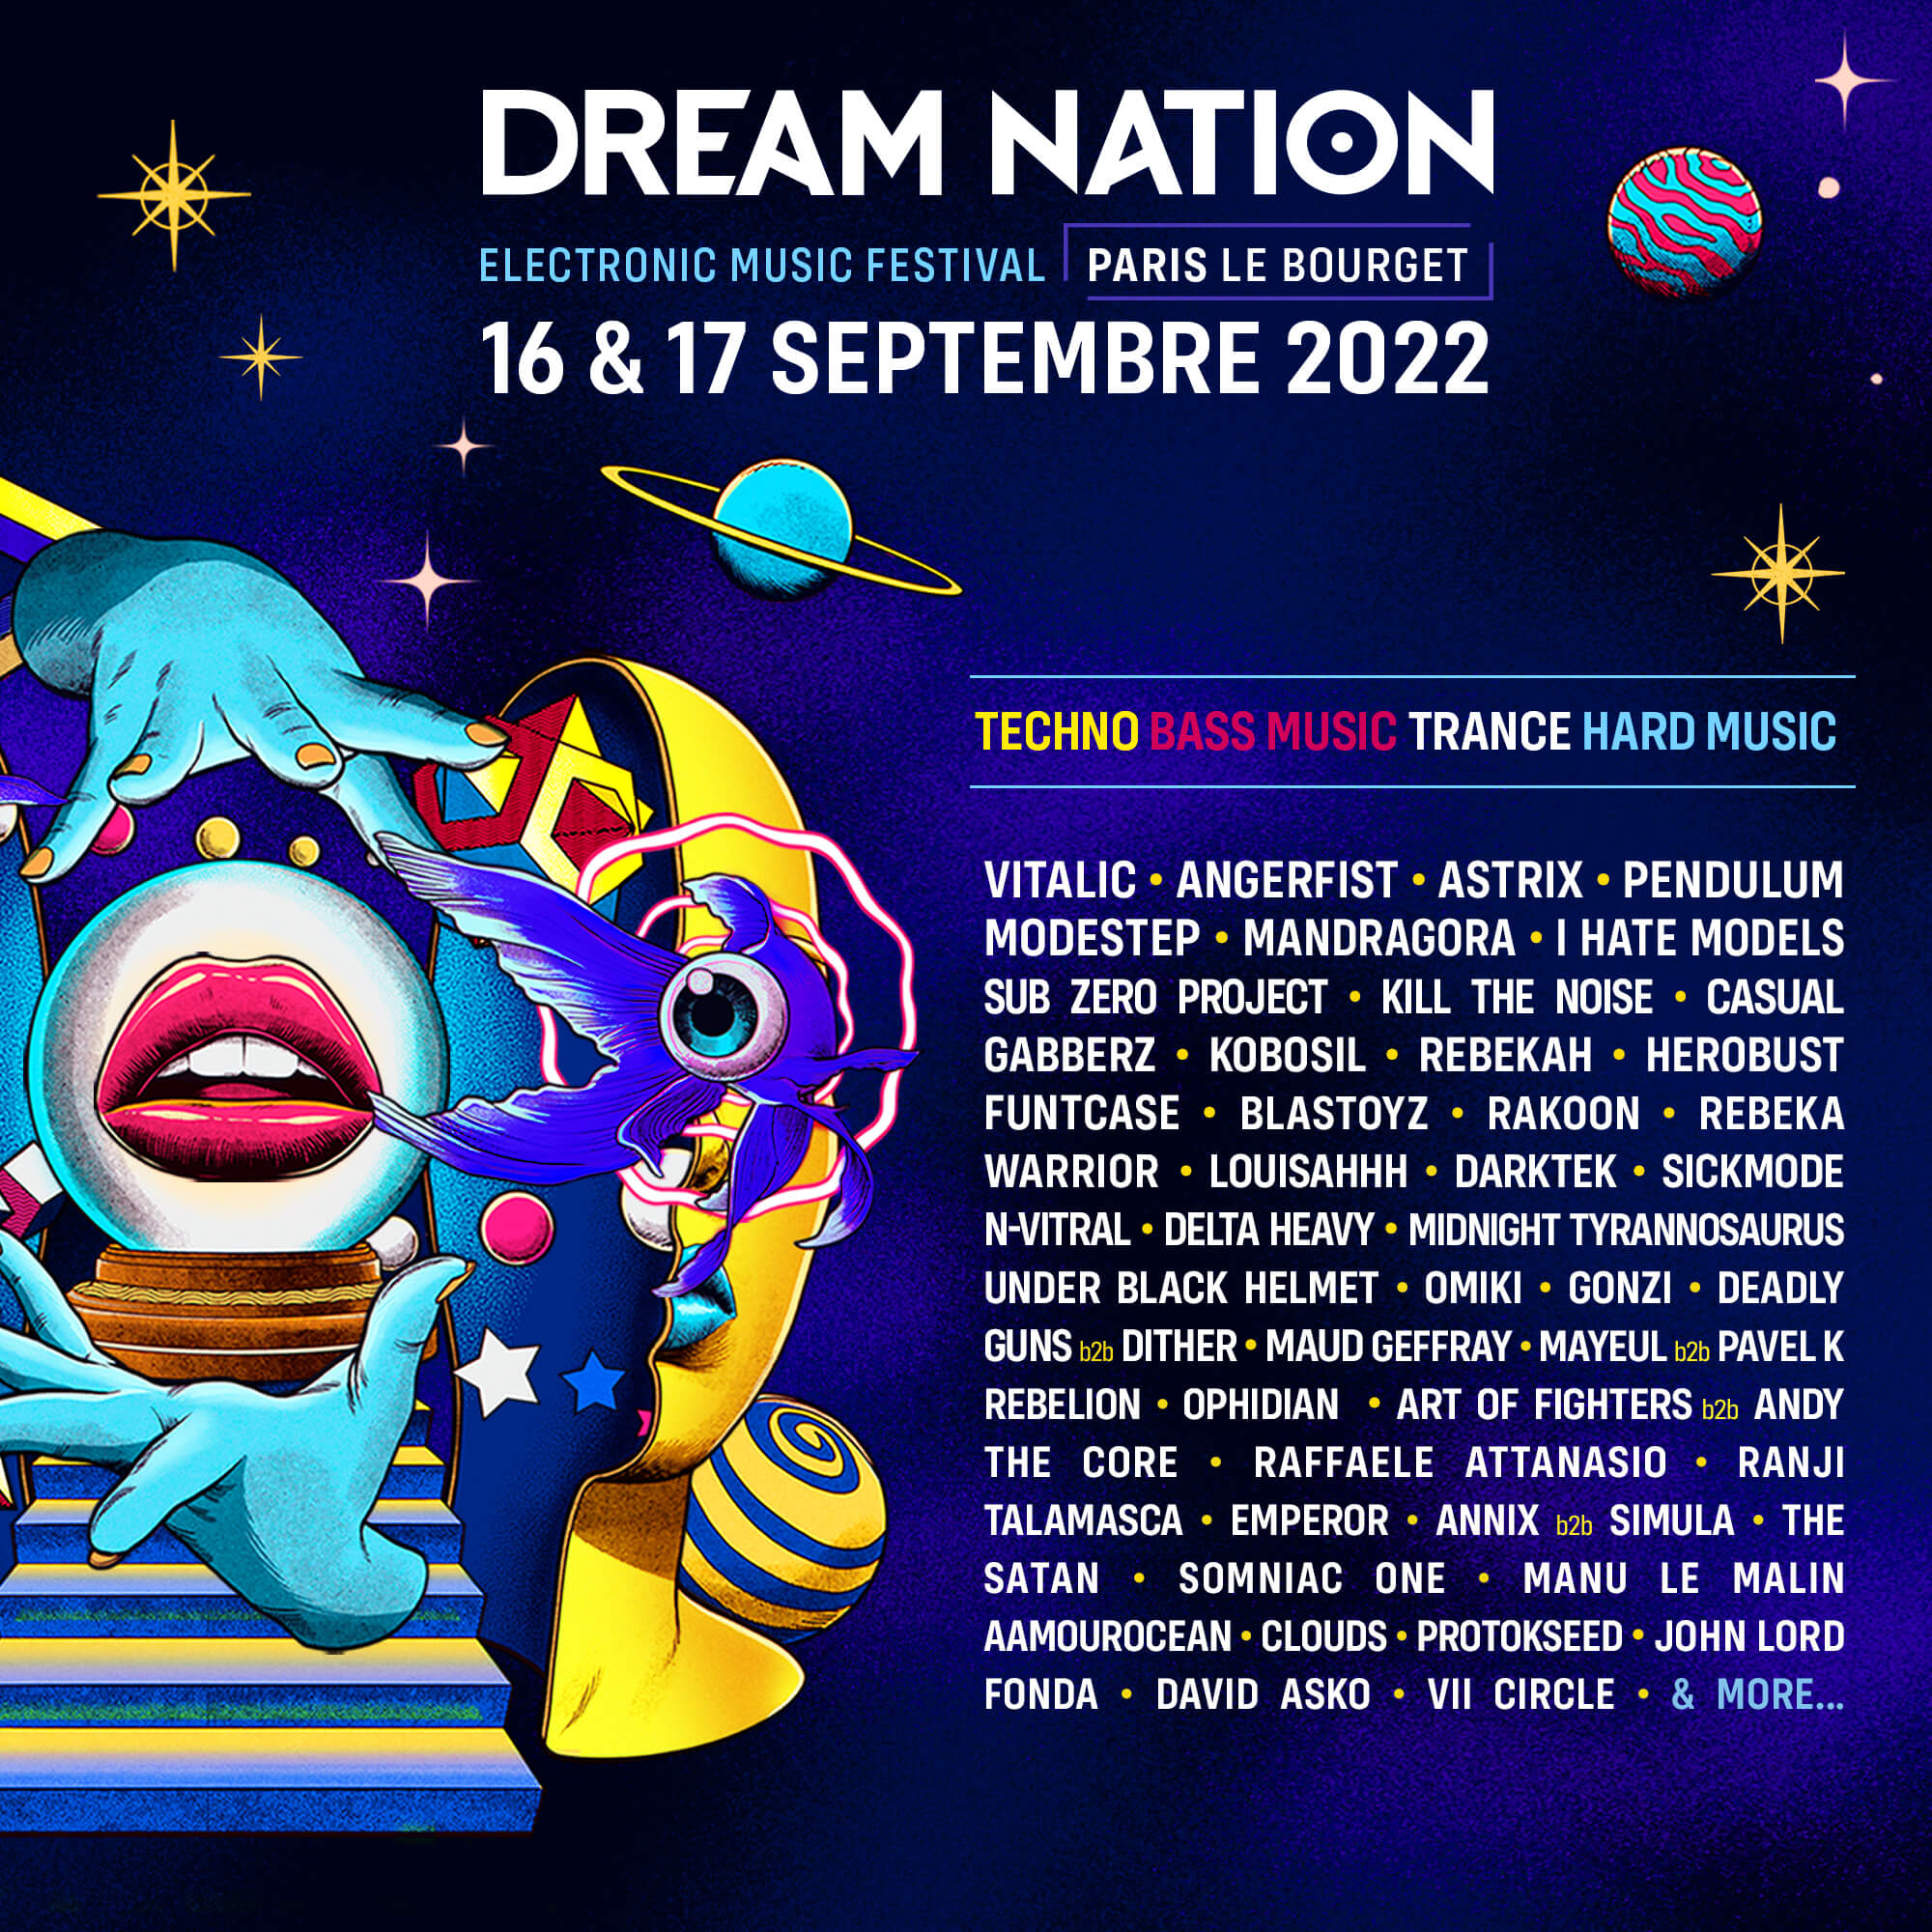 Guess who is playing at the Dream Nation Festival?